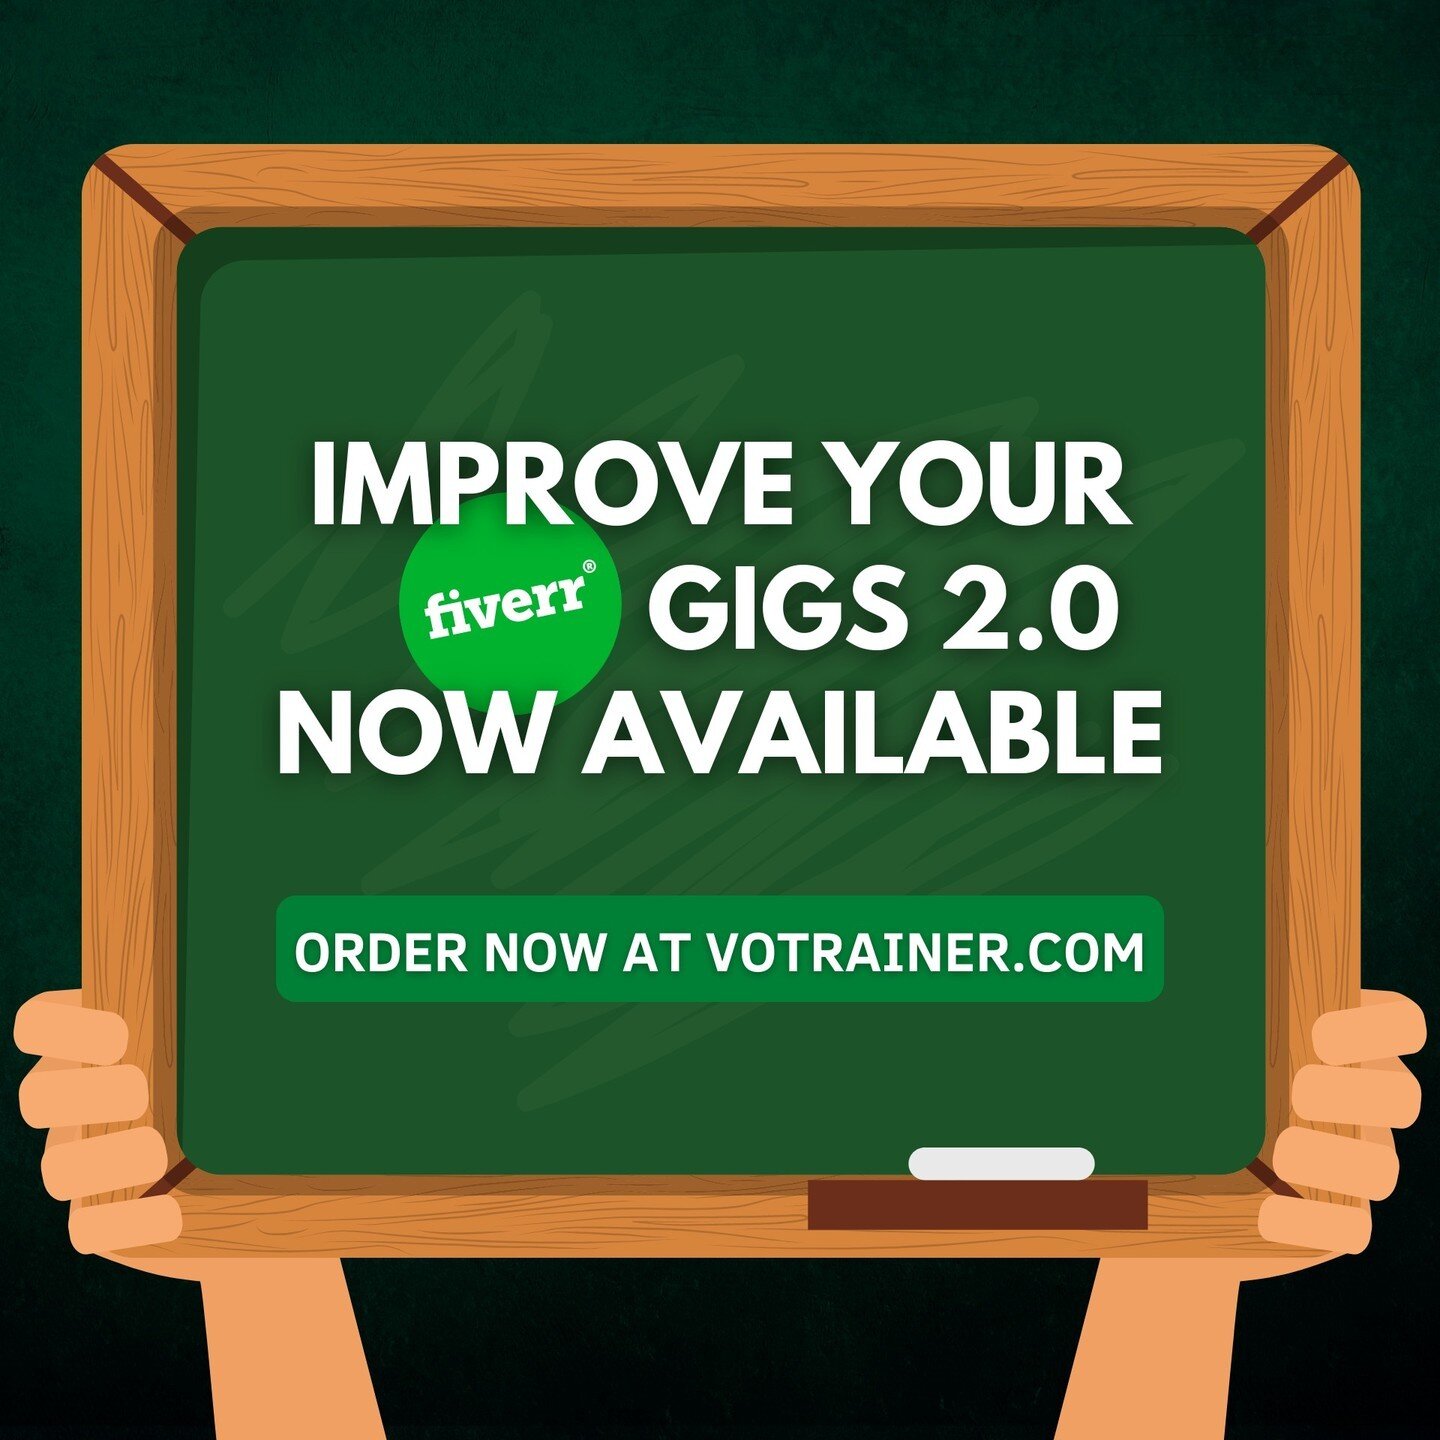 My Fiverr course, Improve your Fiverr Gigs, has been completely updated for 2022! The all new course features brand new video content with all the latest tips, tricks, and best practices to help you succeed on the platform. What are you waiting for? 